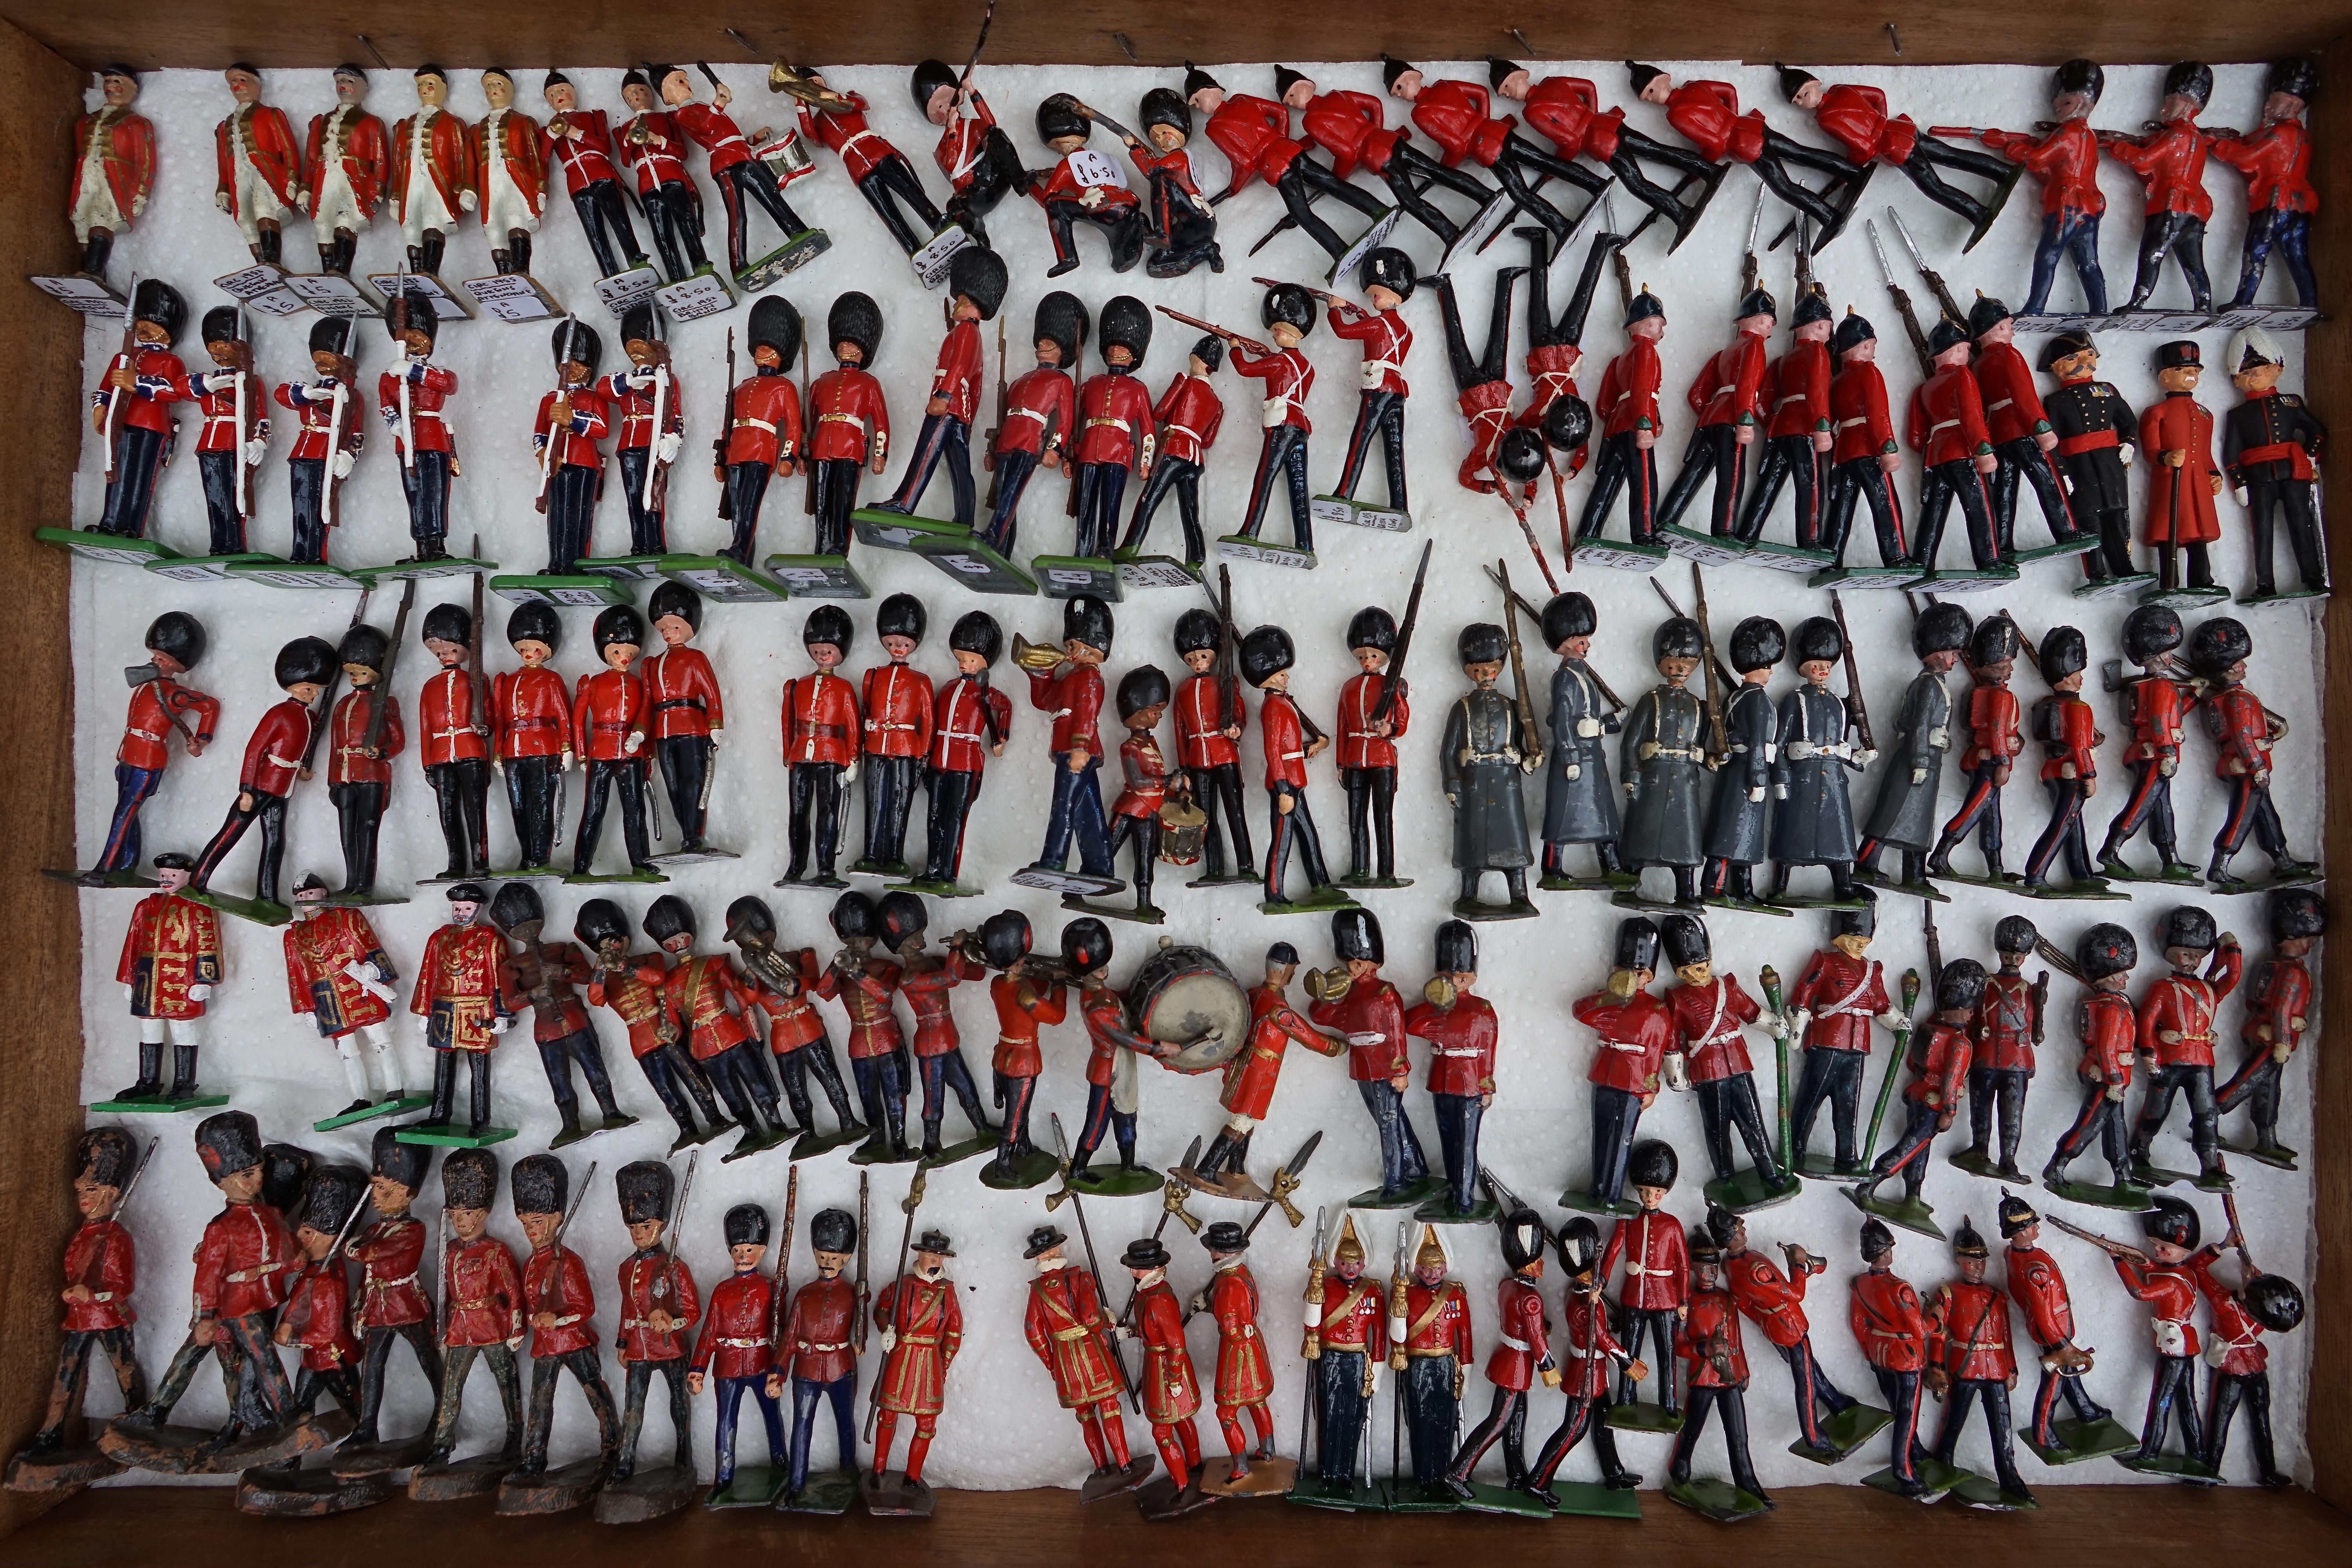 Philip Shalam Figurative Photograph - TOY SOLDIERS ON PARADE - CONTEMPORARY PHOTOGRAPH BY PHILIP SHALAM